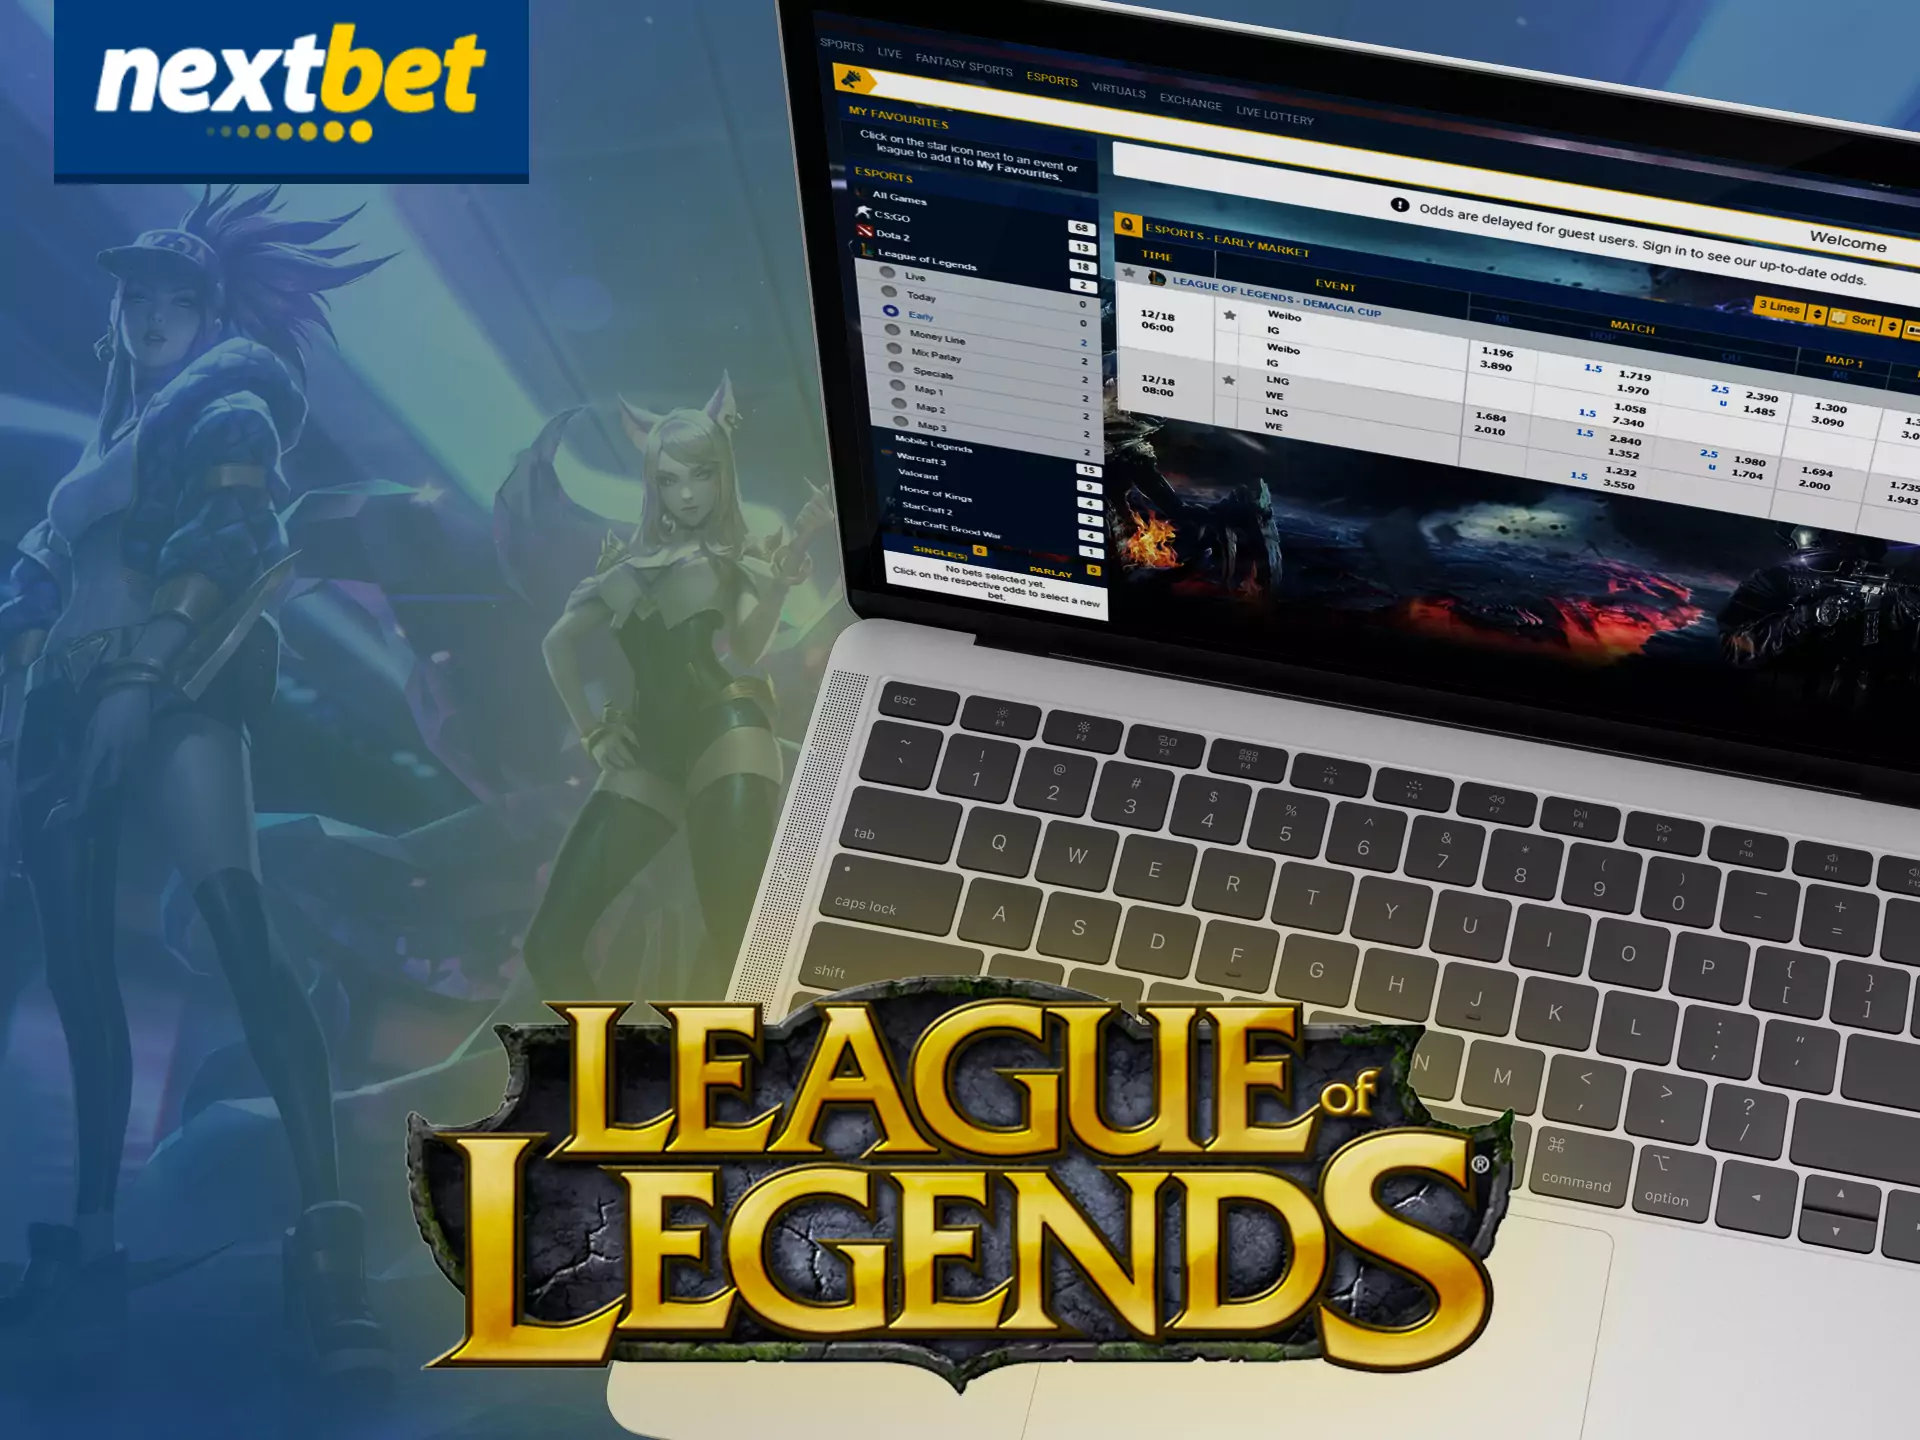 In Nextbet, place your bets on the League of Legends.